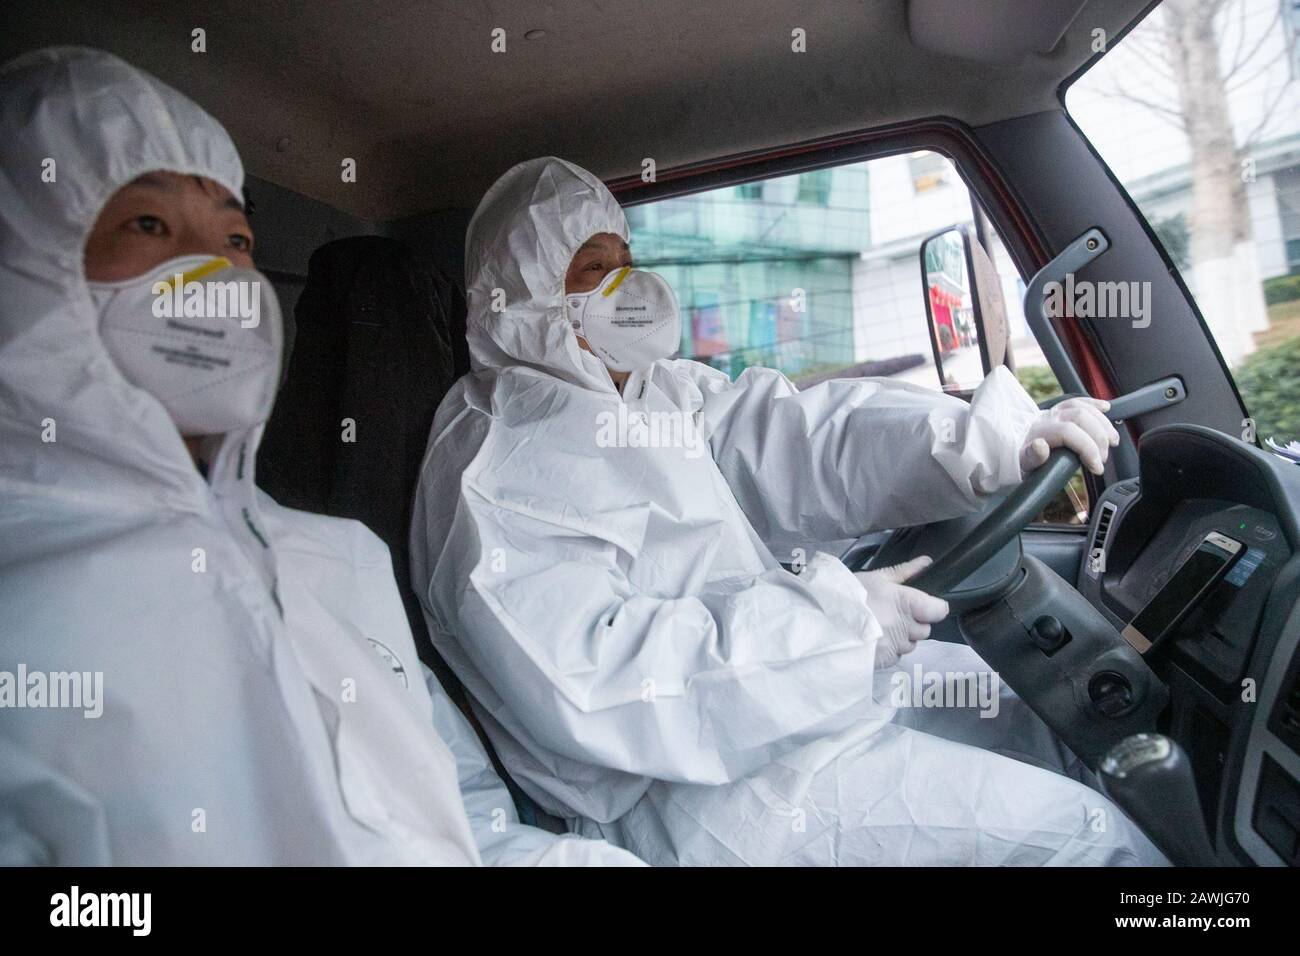 Workers of Chinese retailer Suning.com wearing protecitve clothing for prevention of the new coronavirus and pneumonia deliver electronical appliances Stock Photo